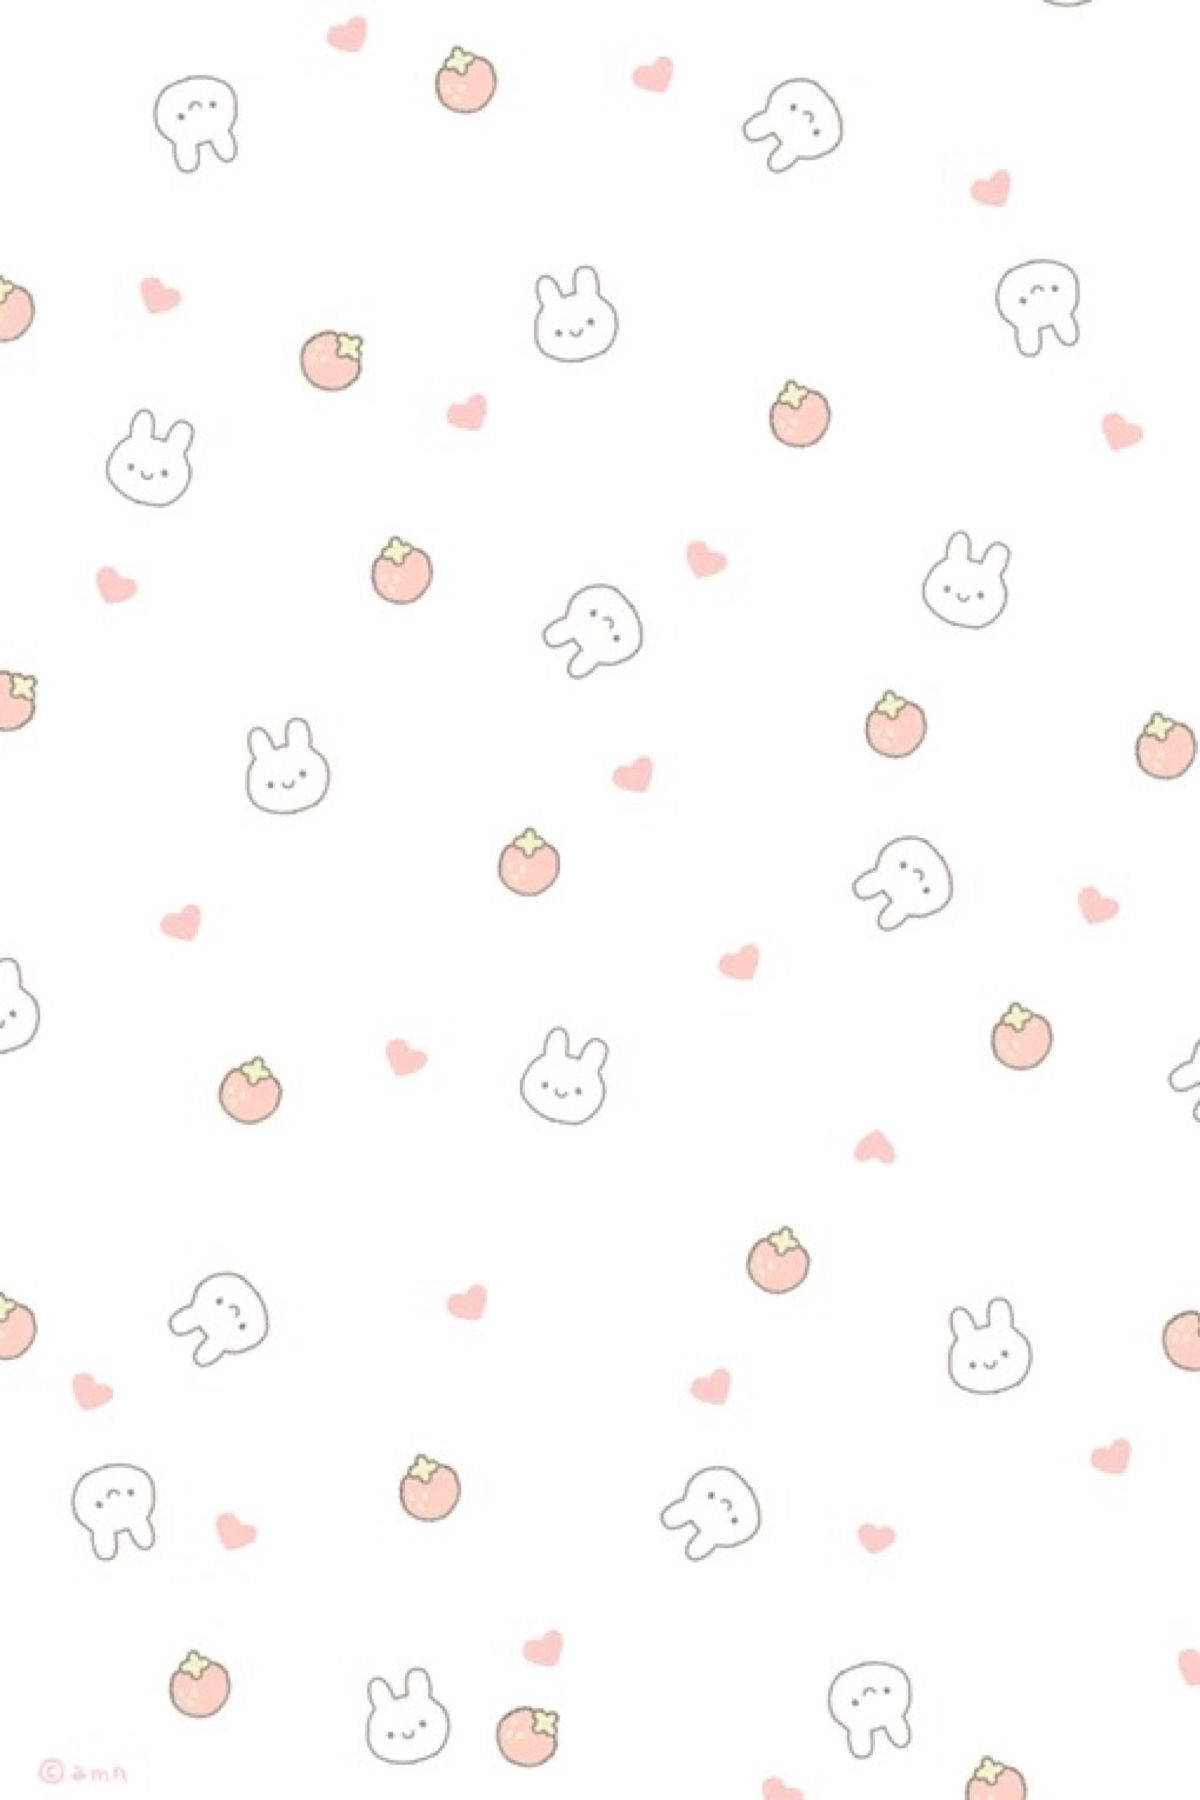 Cute Rabbits And Strawberries Pattern